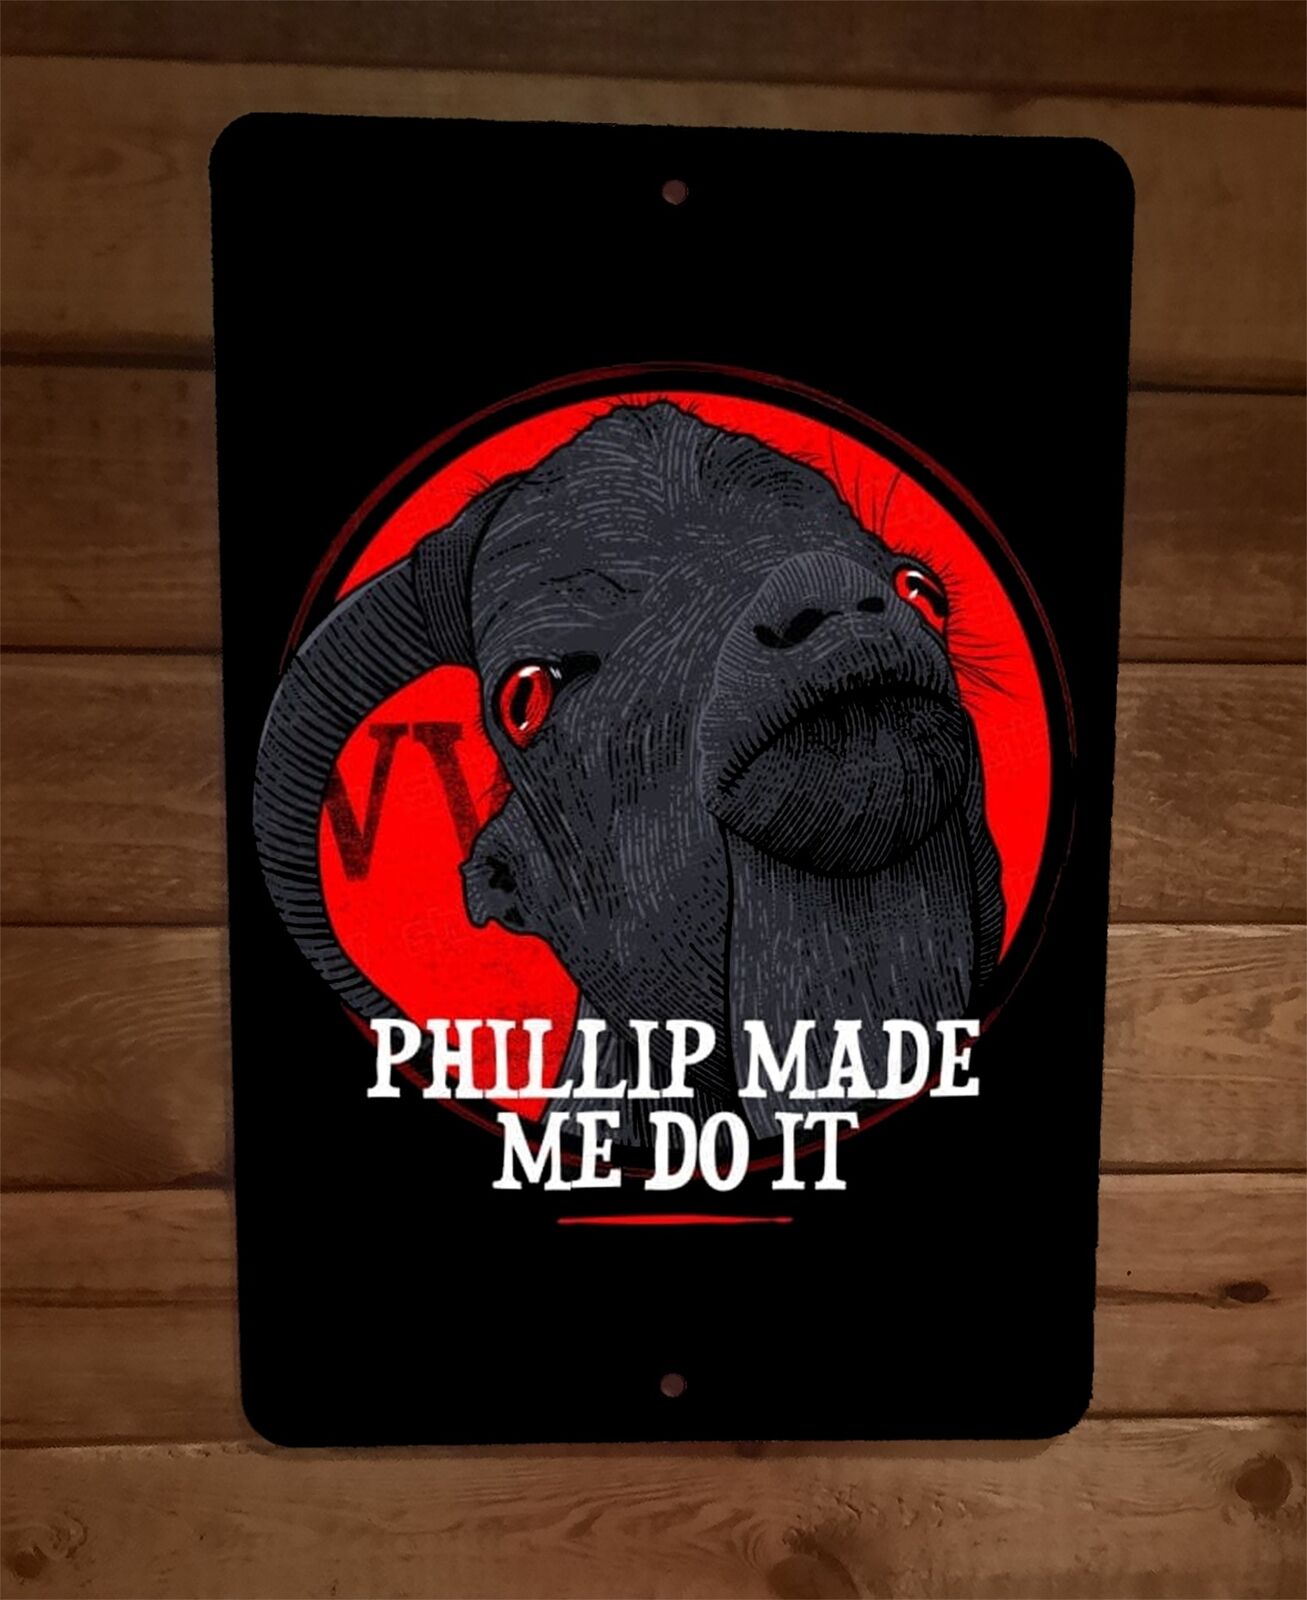 Phillip Made Me Do It 8x12 Metal Wall Sign